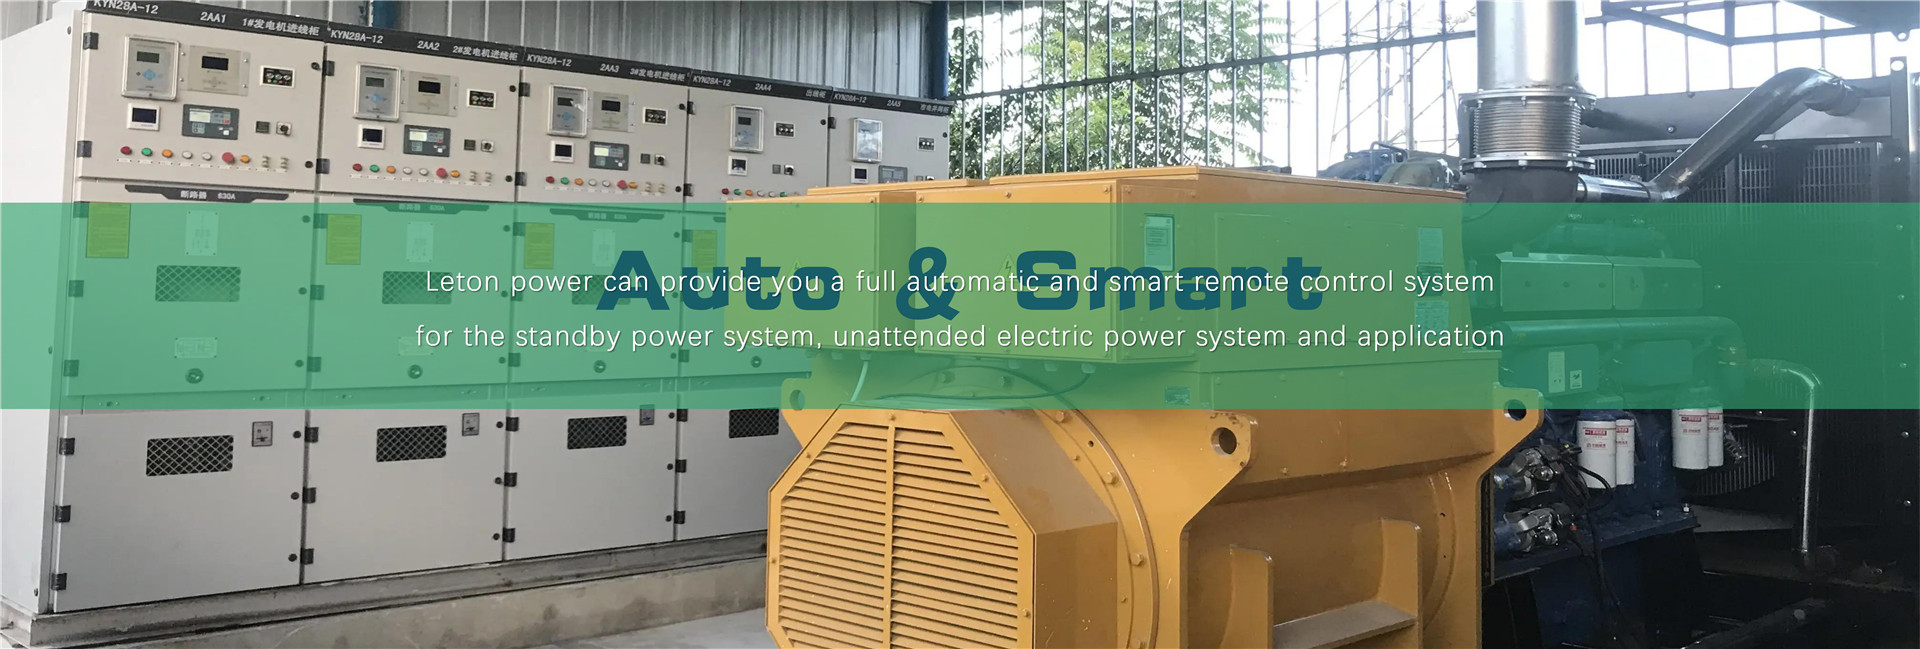 Powerful 6kva Diesel Generator for Reliable Backup Power Needs